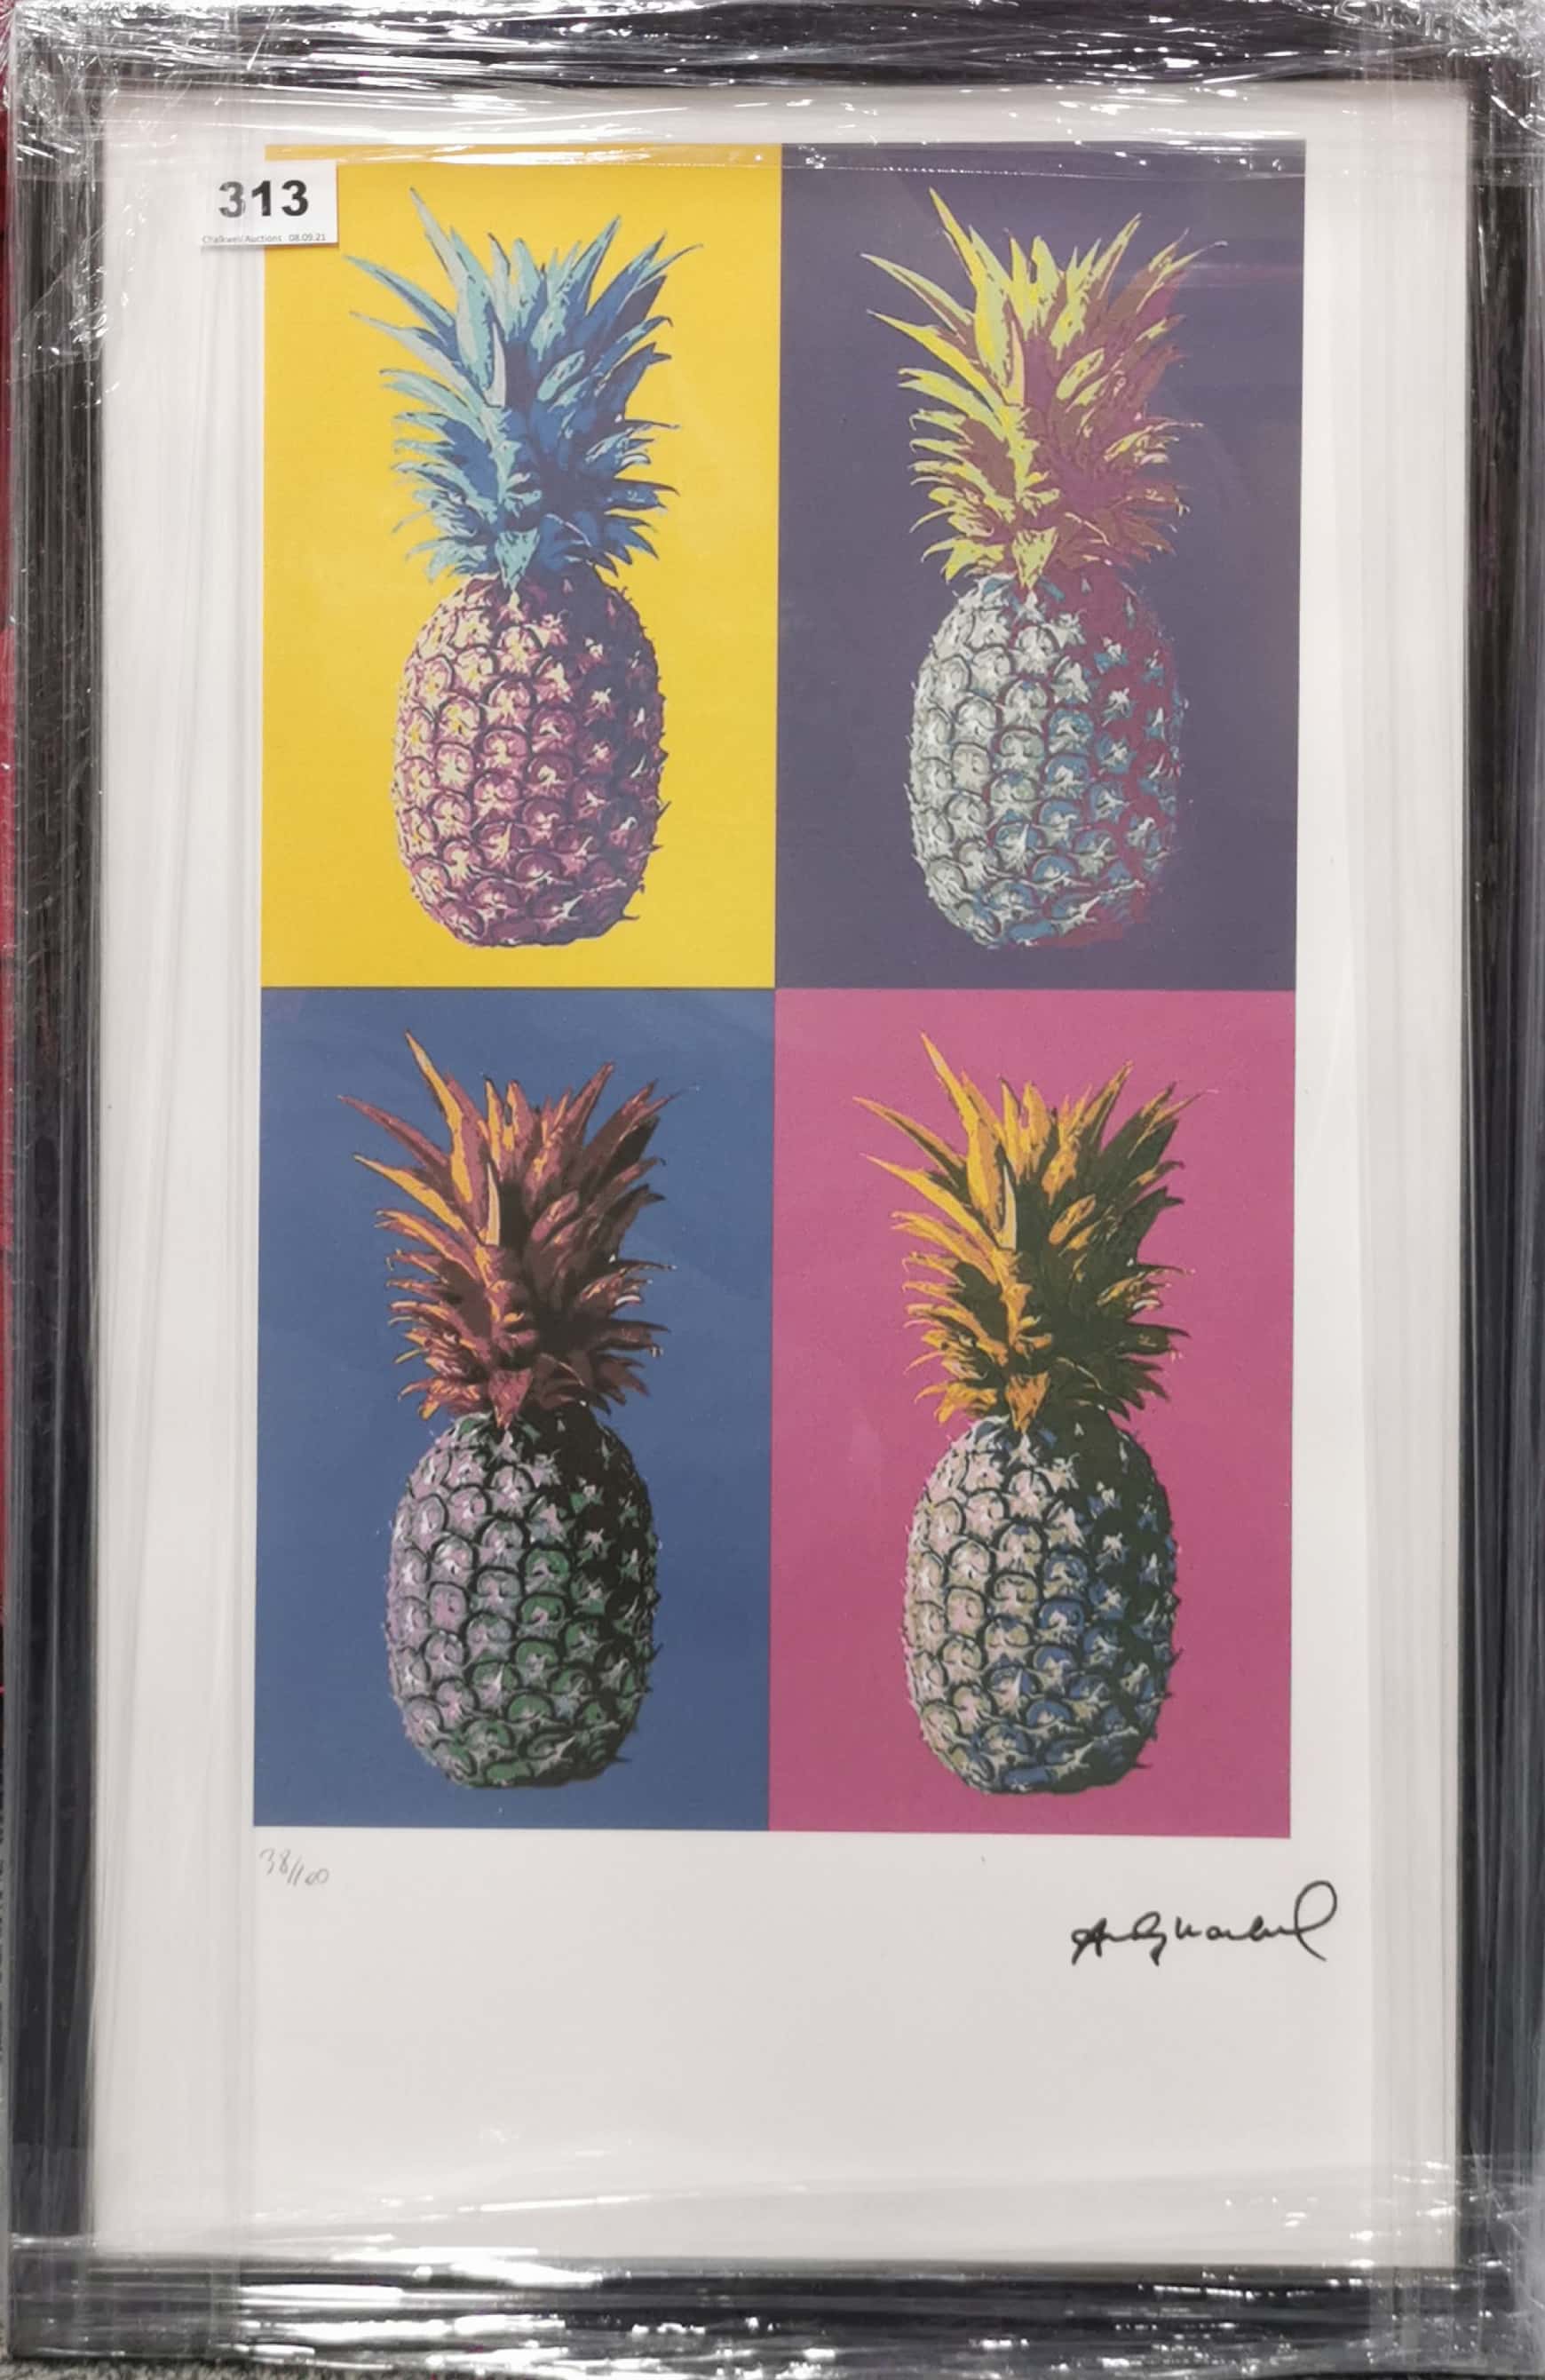 An Andy Warhol framed limited edition (38/100) lithograph called 'Pineapple' frame 61 x 42cm.